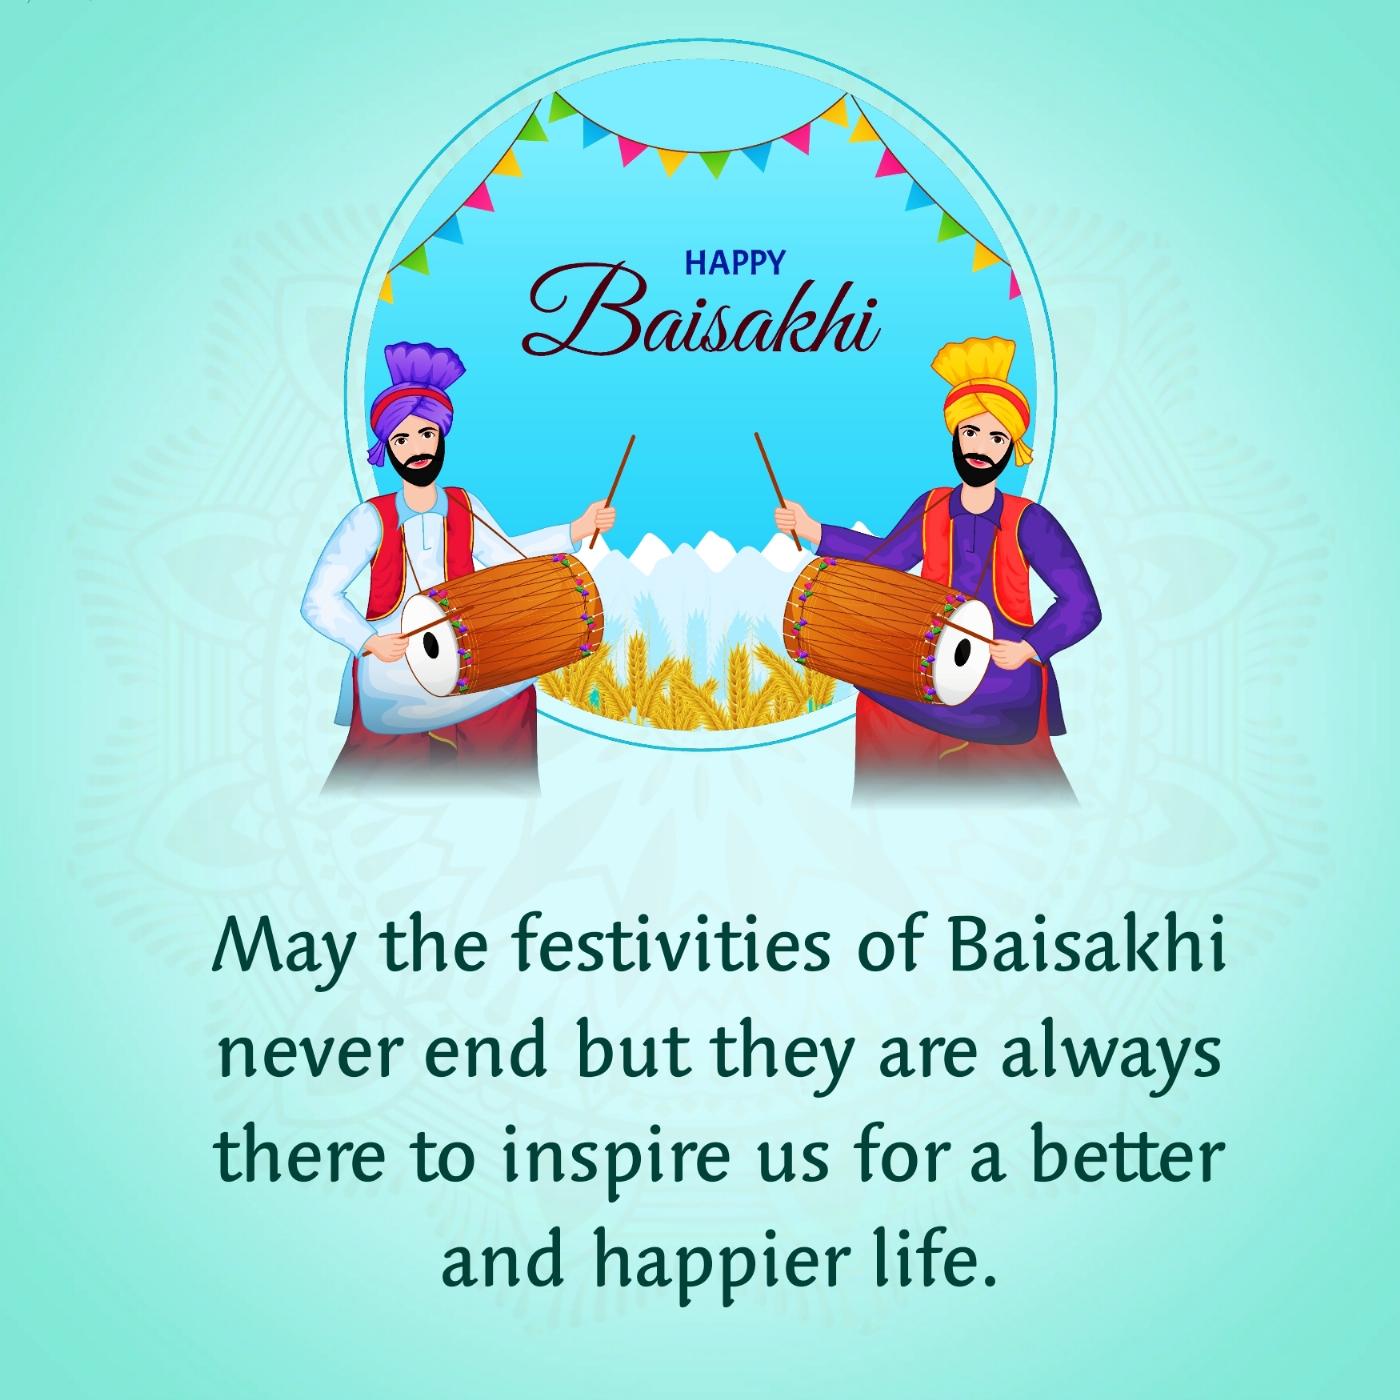 May the festivities of Baisakhi never end